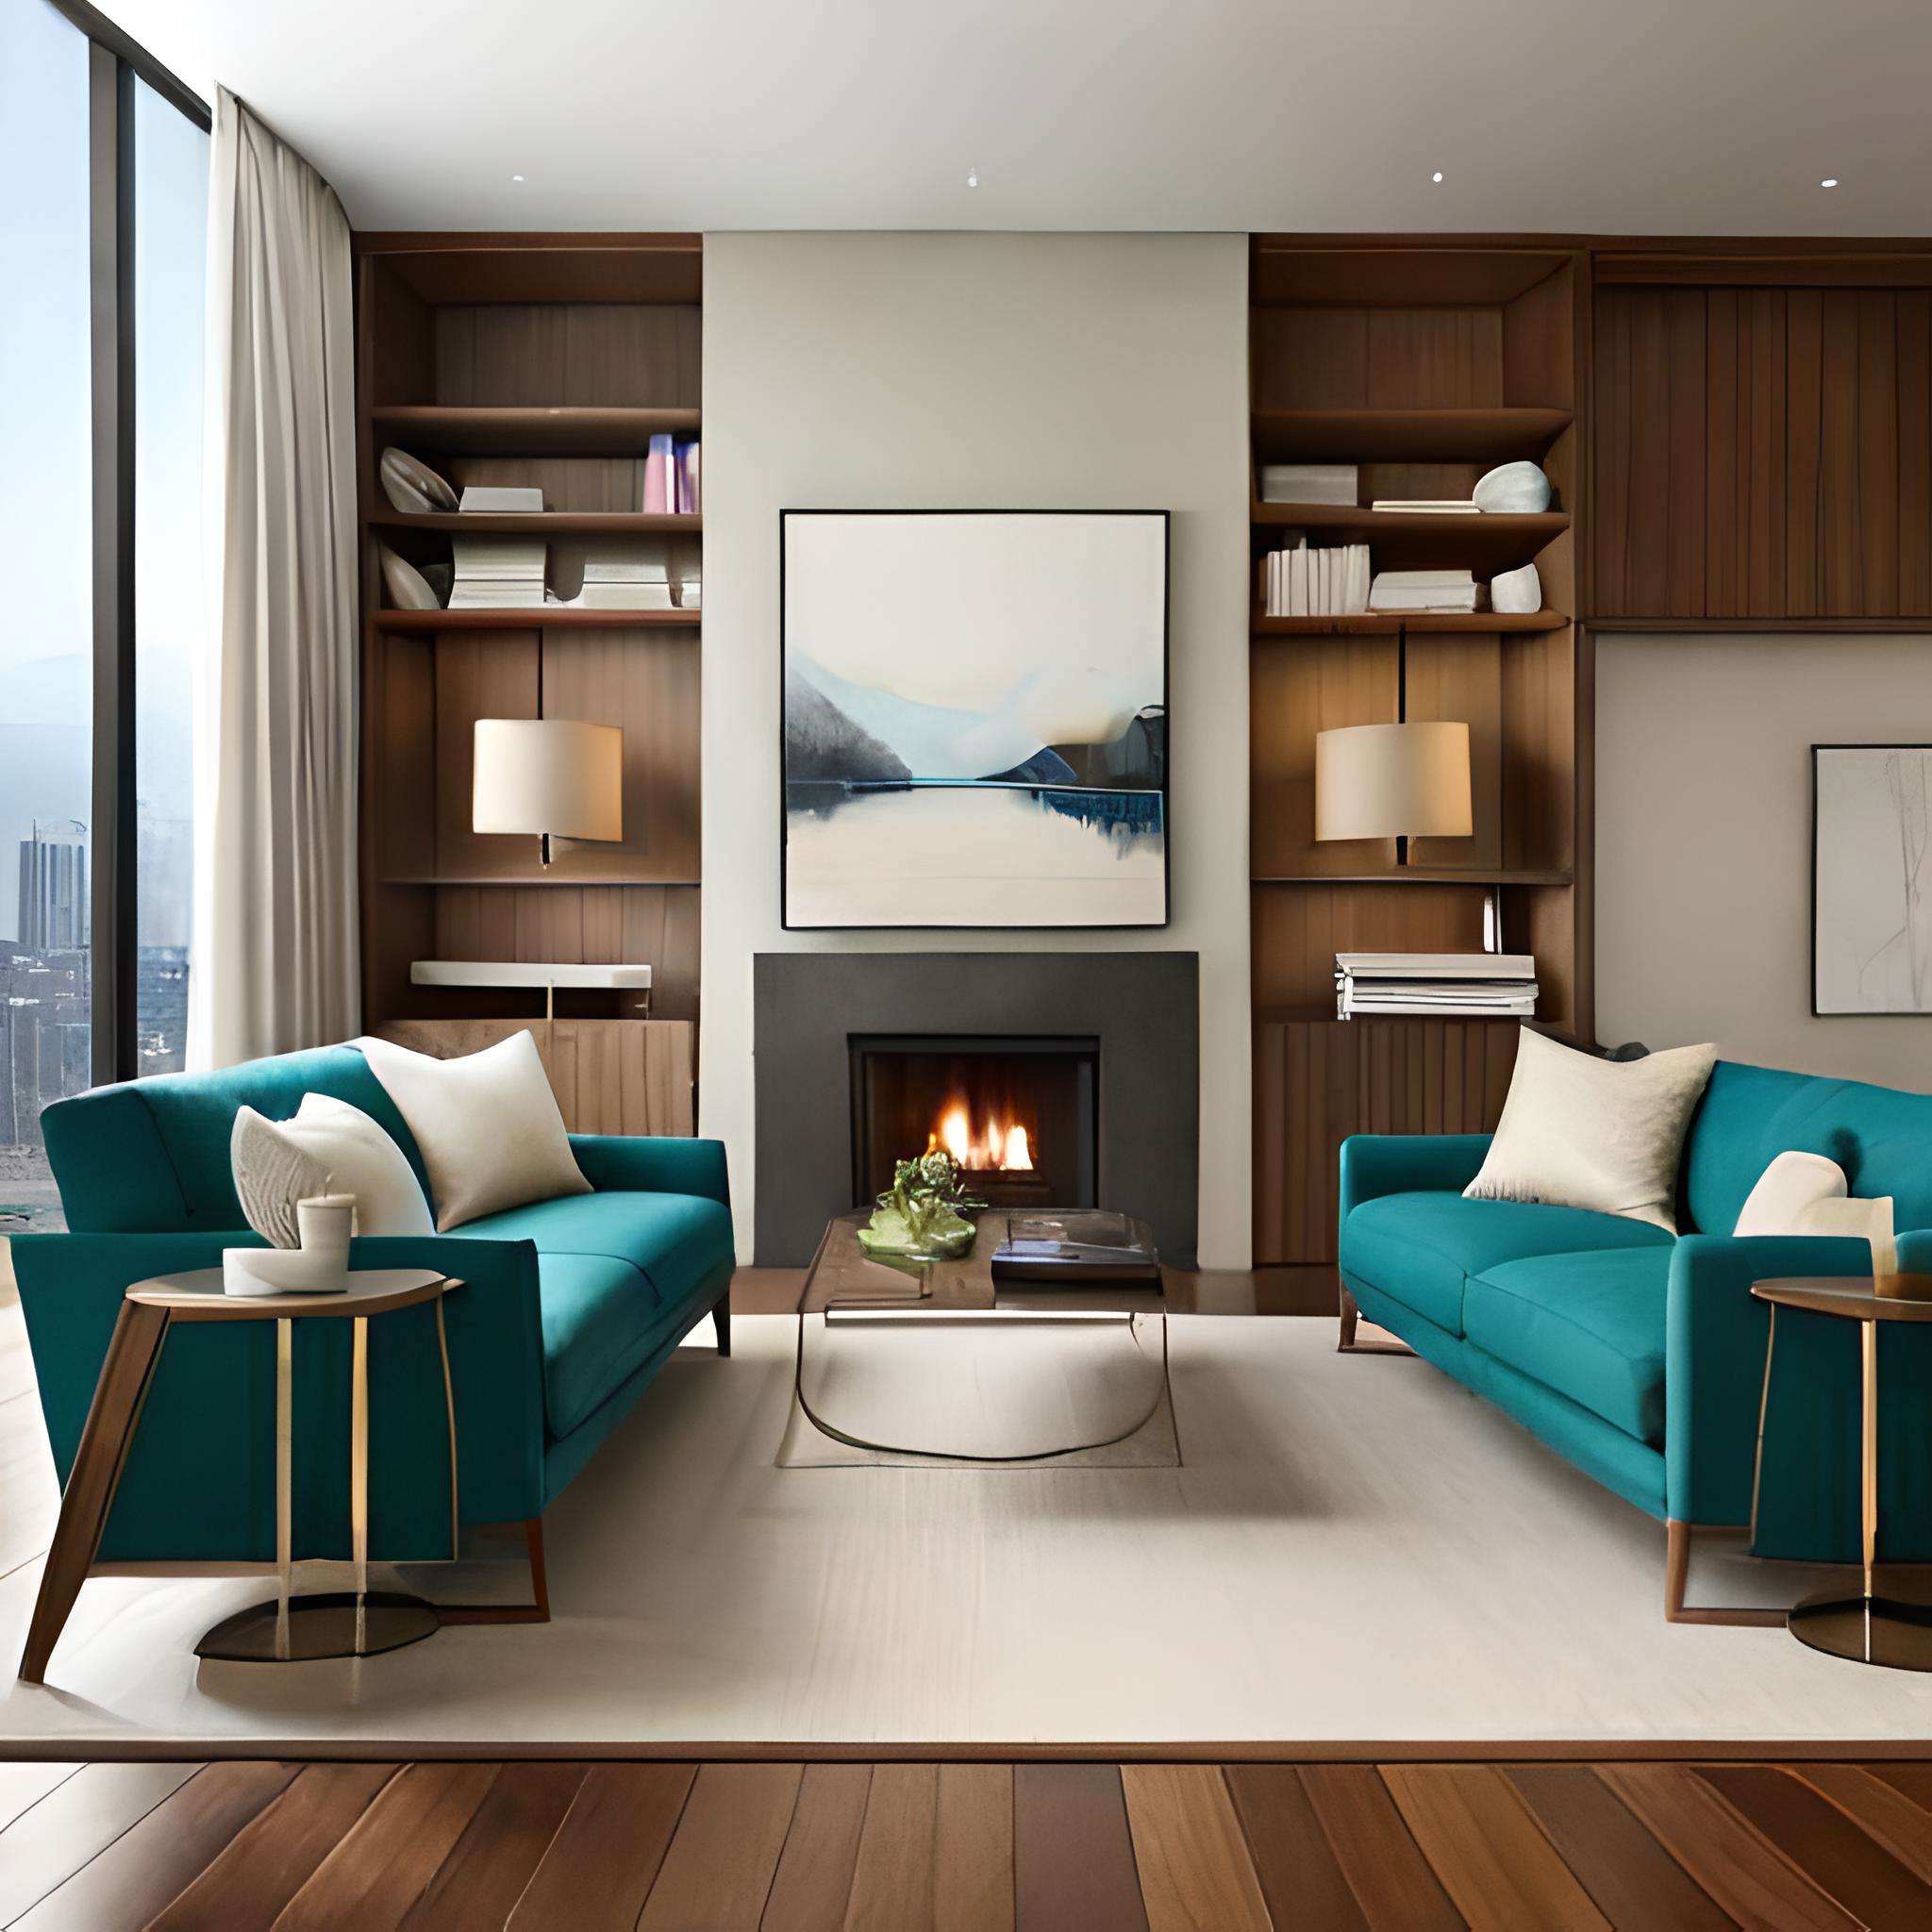 10 Ideas For Awkward Living Room Layout With Fireplace